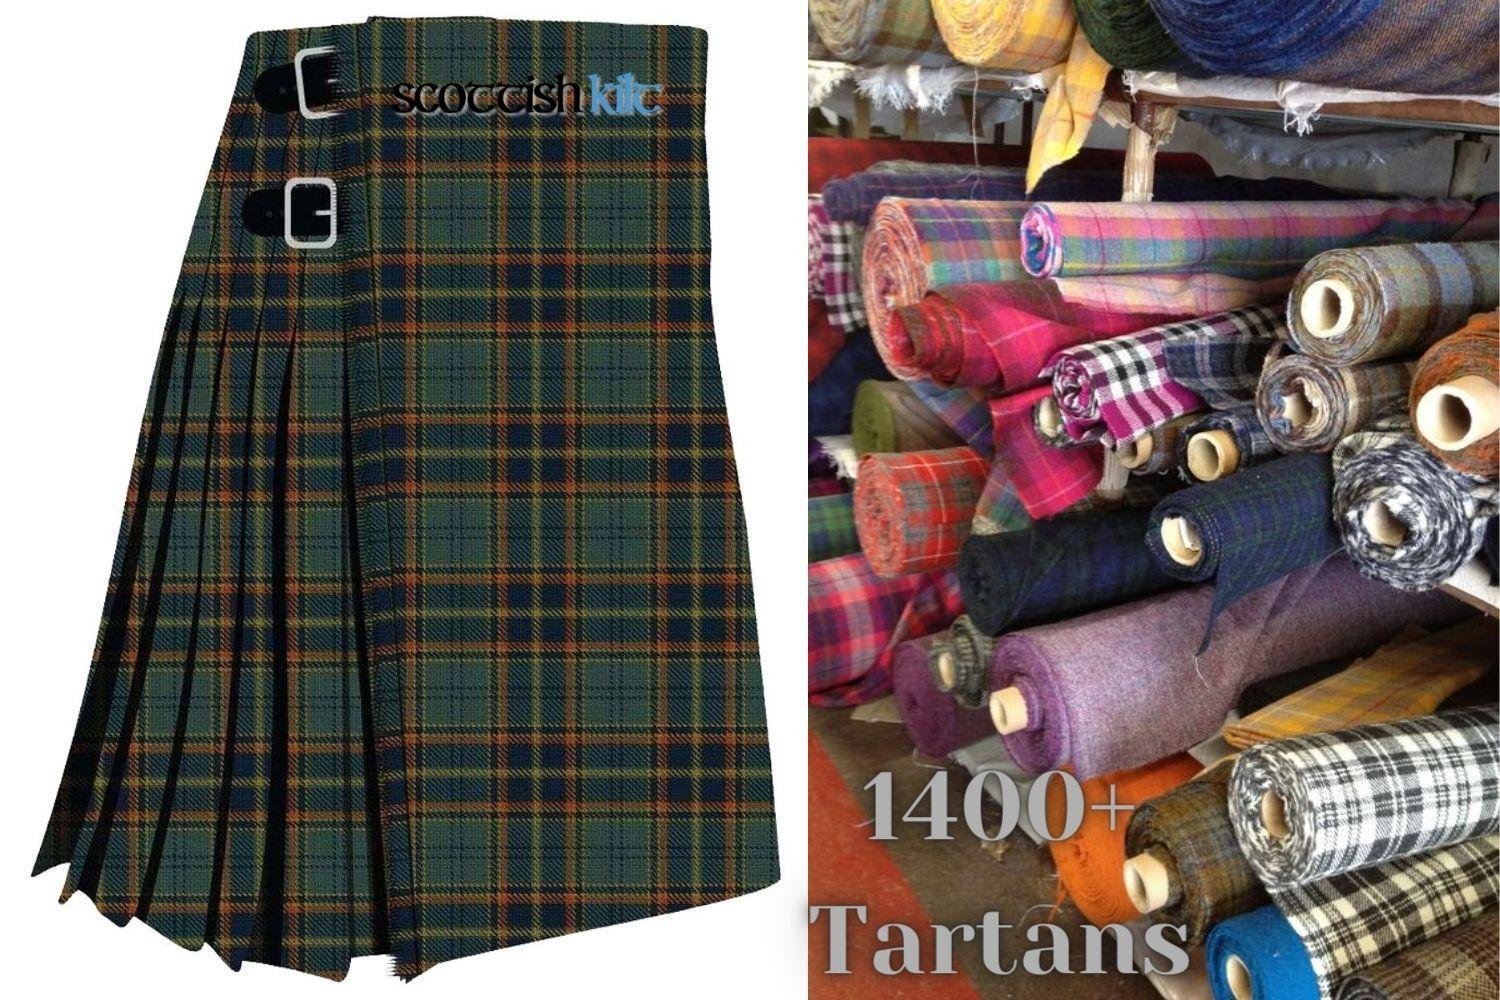 County Antrim Tartan’s Presence in Performances and Exhibitions
